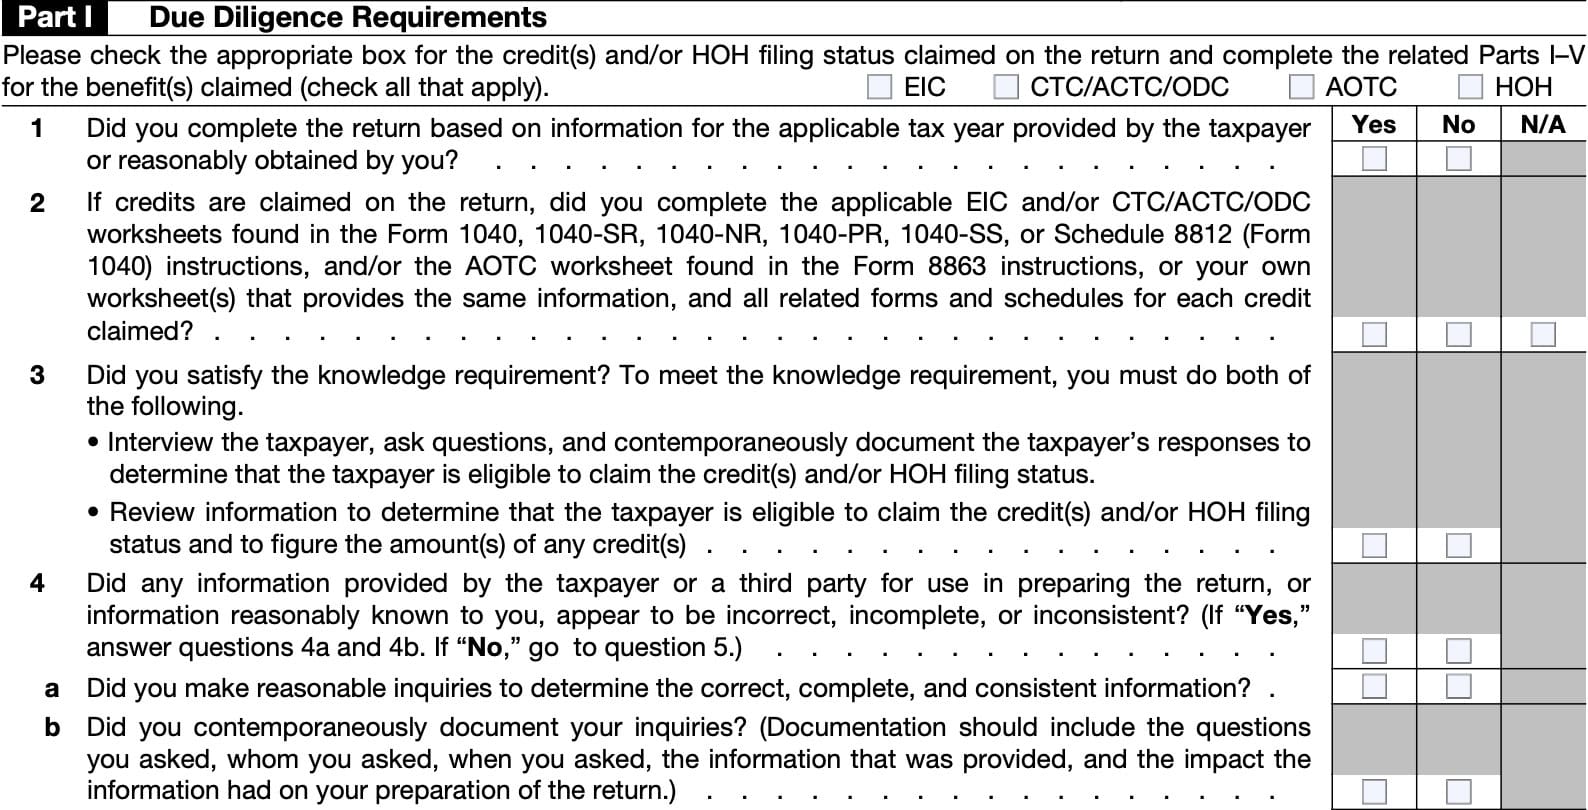 irs form 8867, part i, due diligence requirements